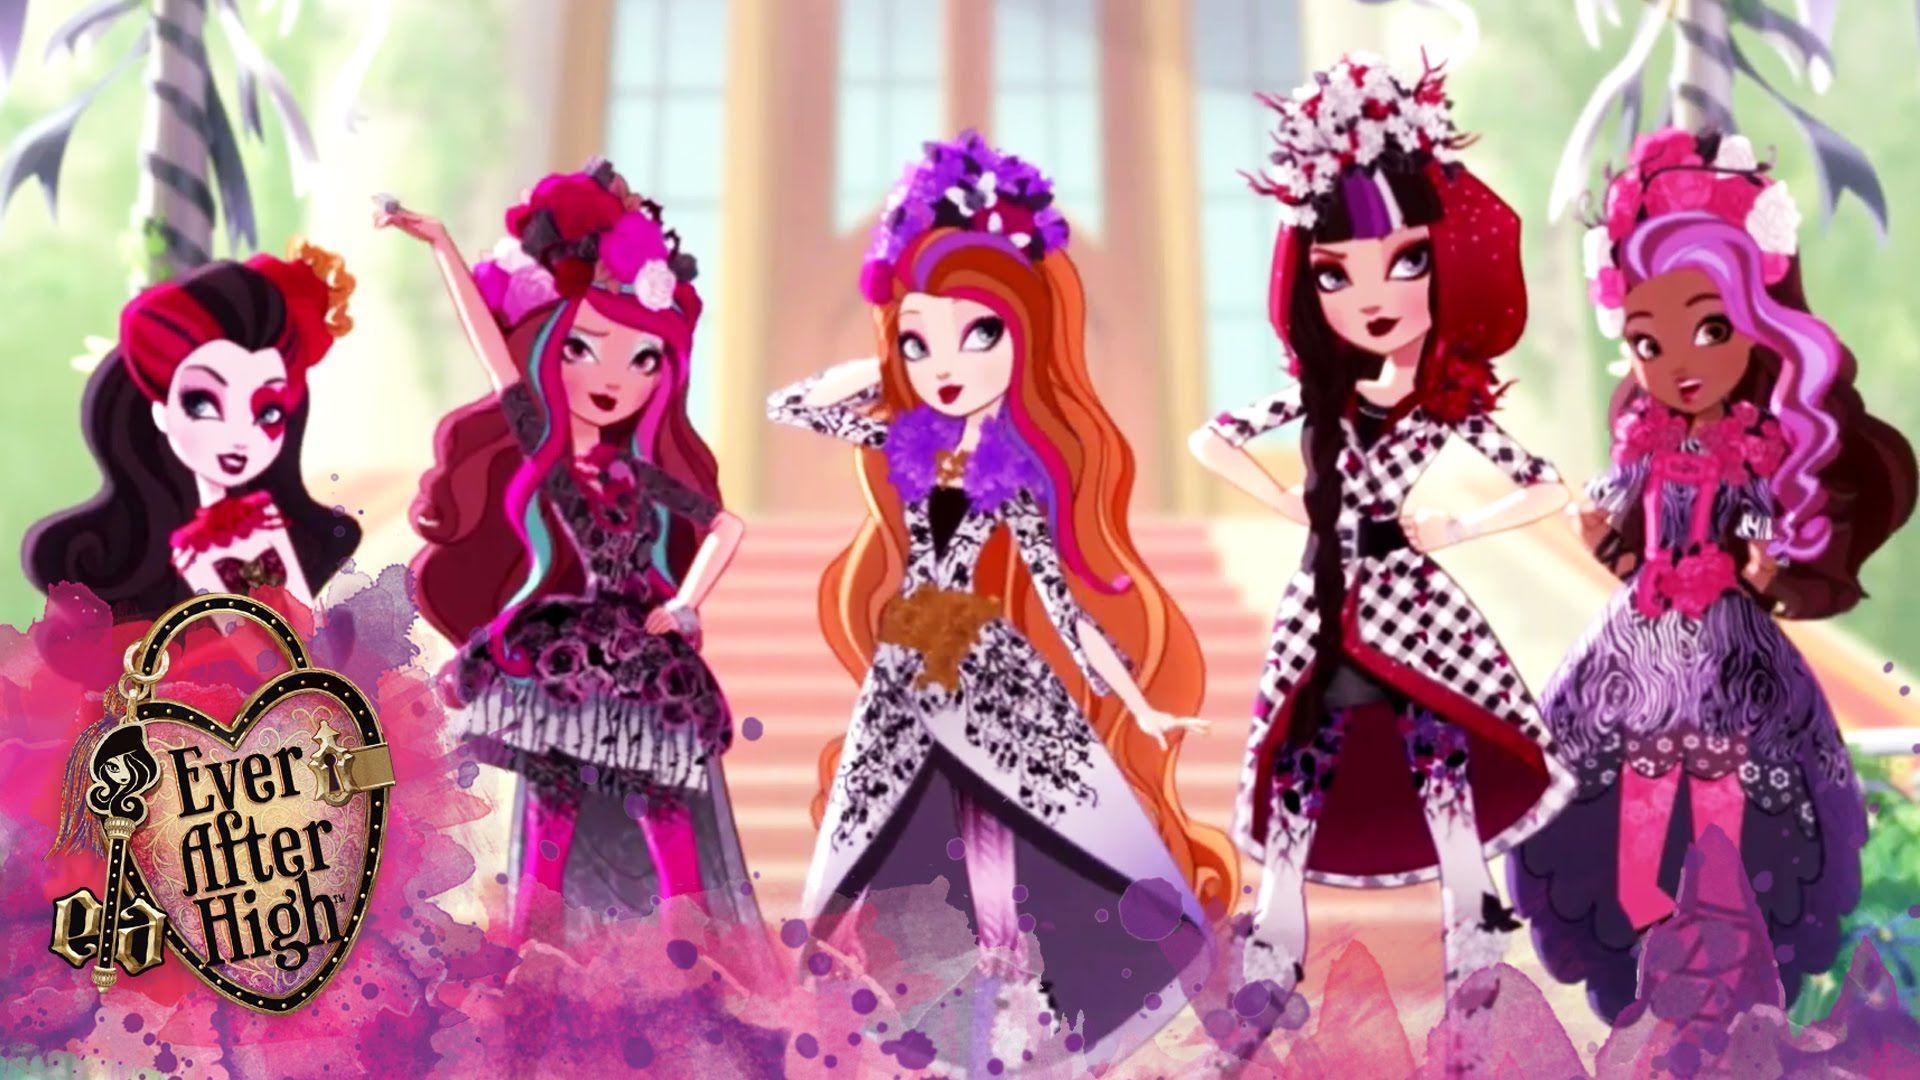 Ever After High Wallpaper For Ipad